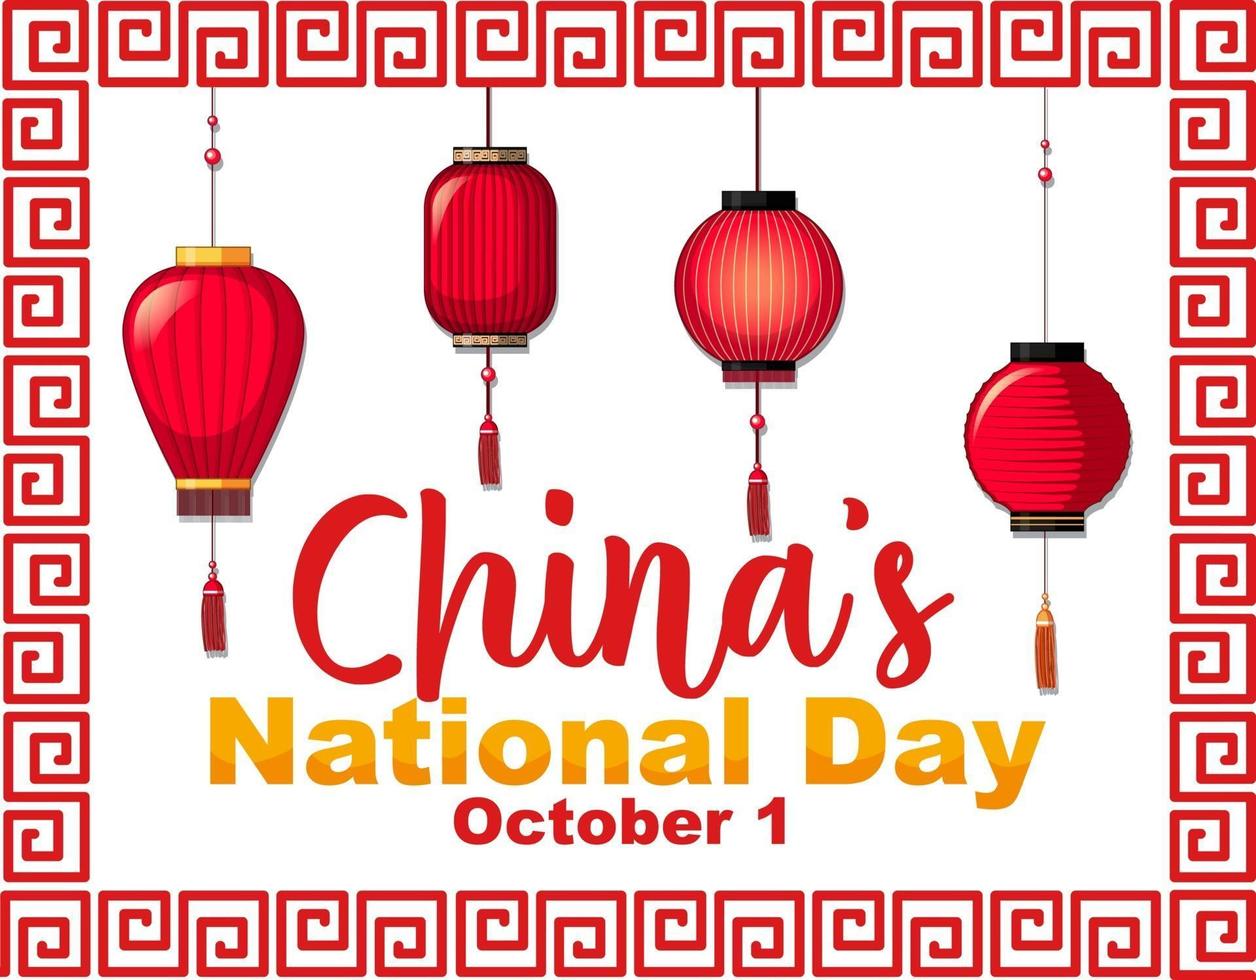 China's National Day banner with Different China lantern vector